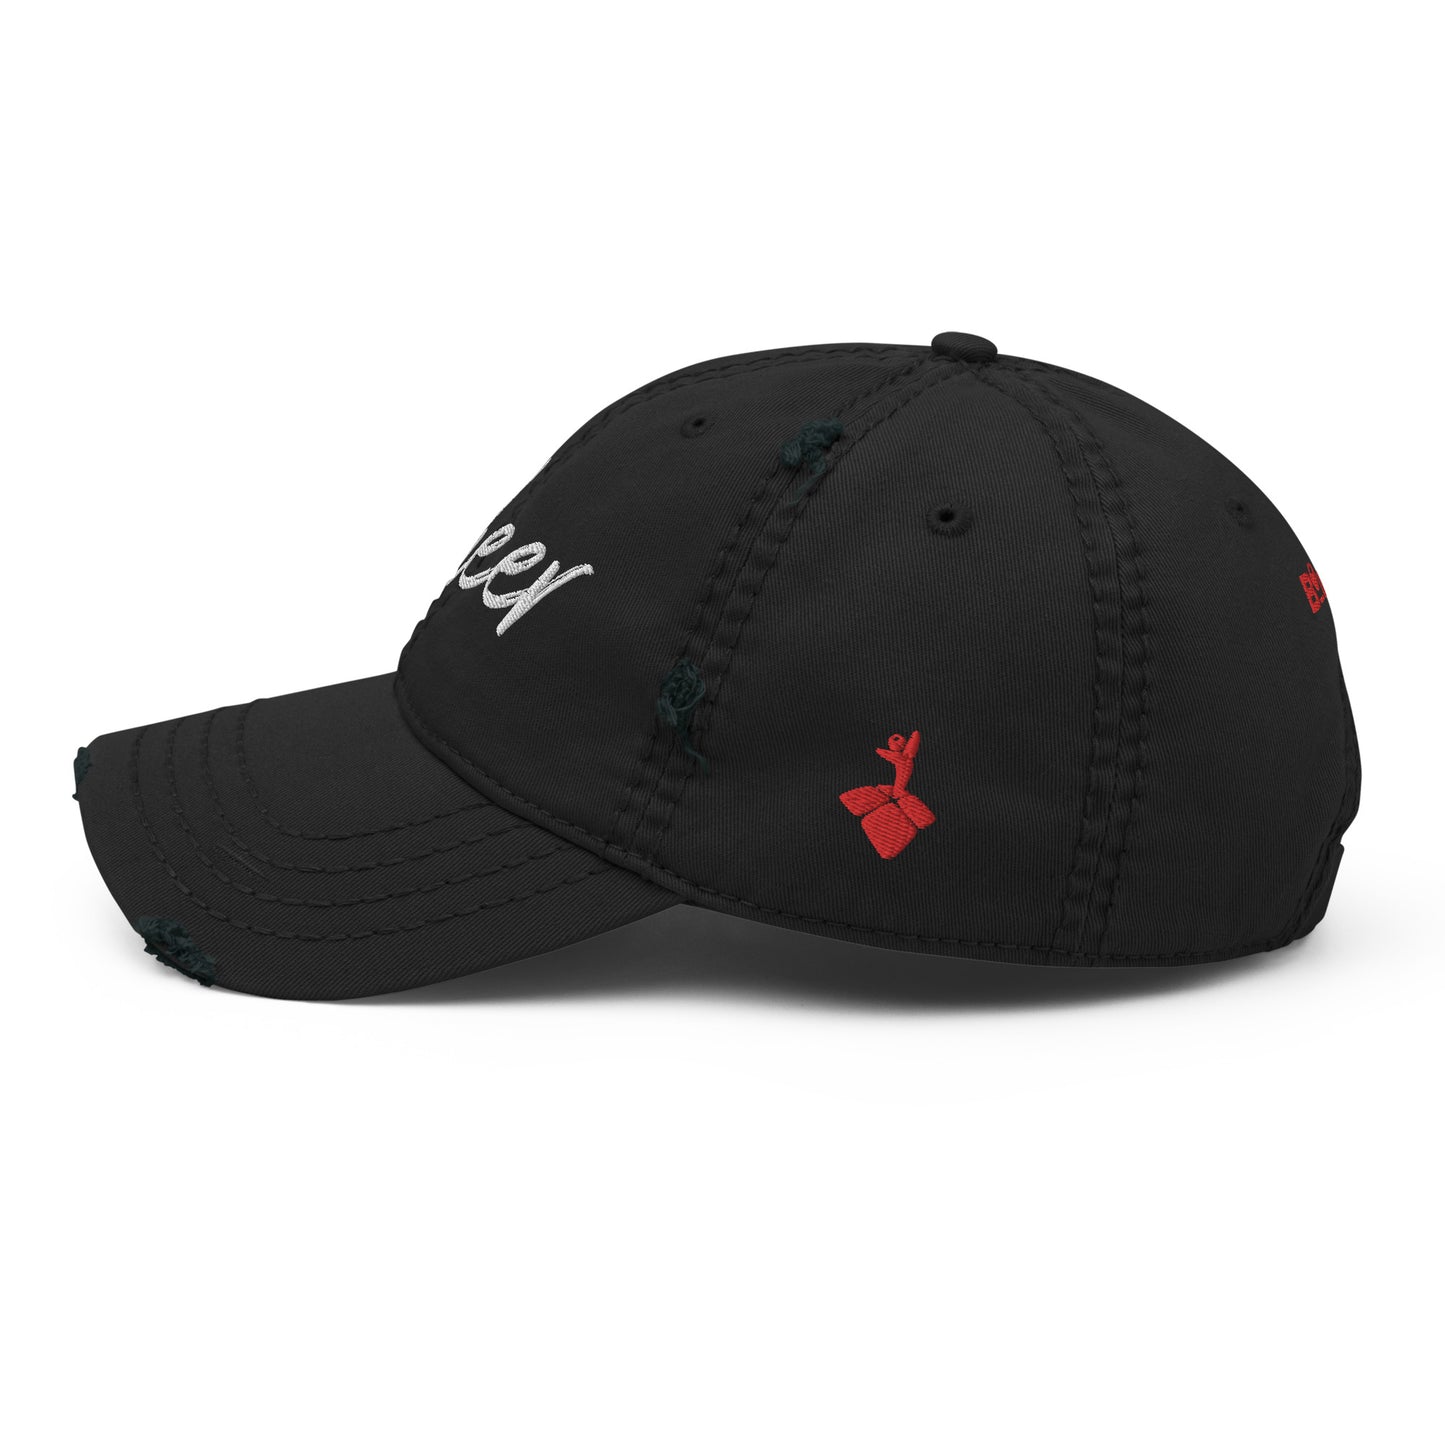 CHEER_TBC Identity (back)_TBC ICON (side)_(3 print areas)-Distressed Dad Hat